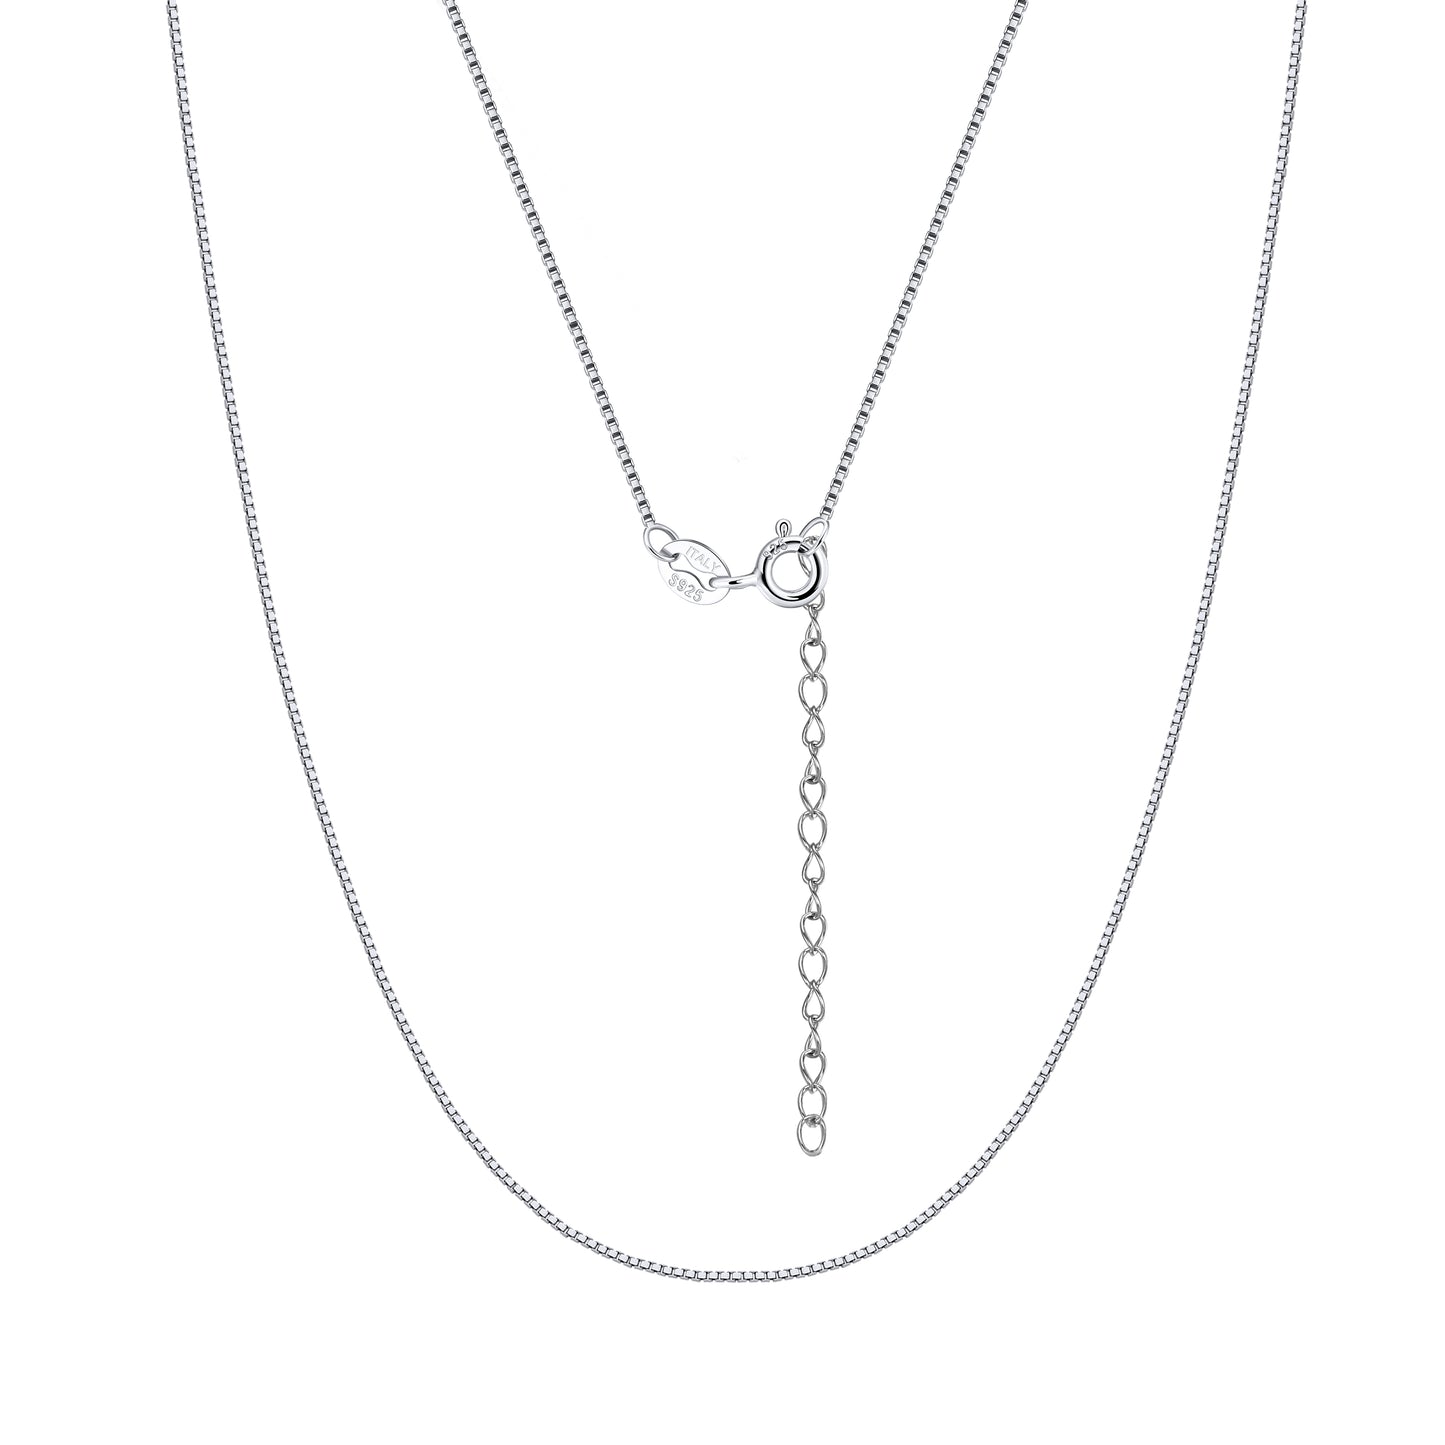 Box Necklace Chain for Men or Women by Ginger Lyne 925 Sterling Silver 24 Inch - Chain-24 Inch